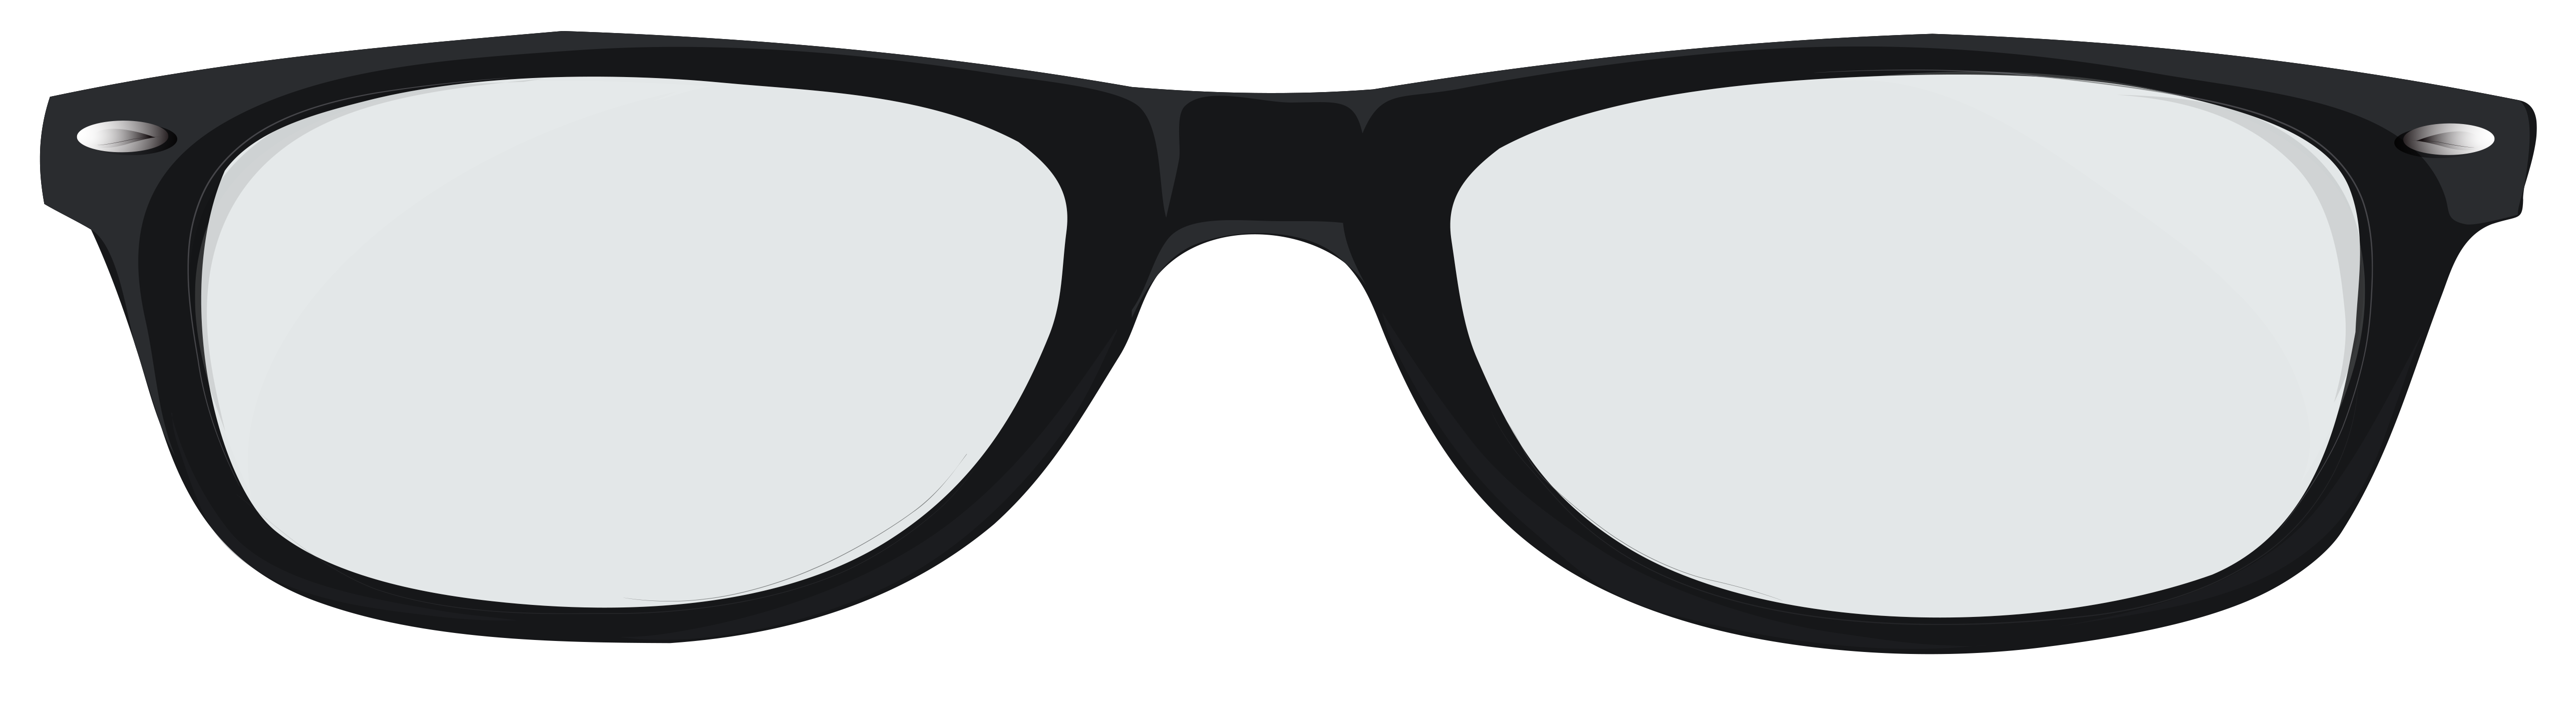 Sunglasses Ray-Ban Pictures Eyewear Amazon.Com Glasses Clipart